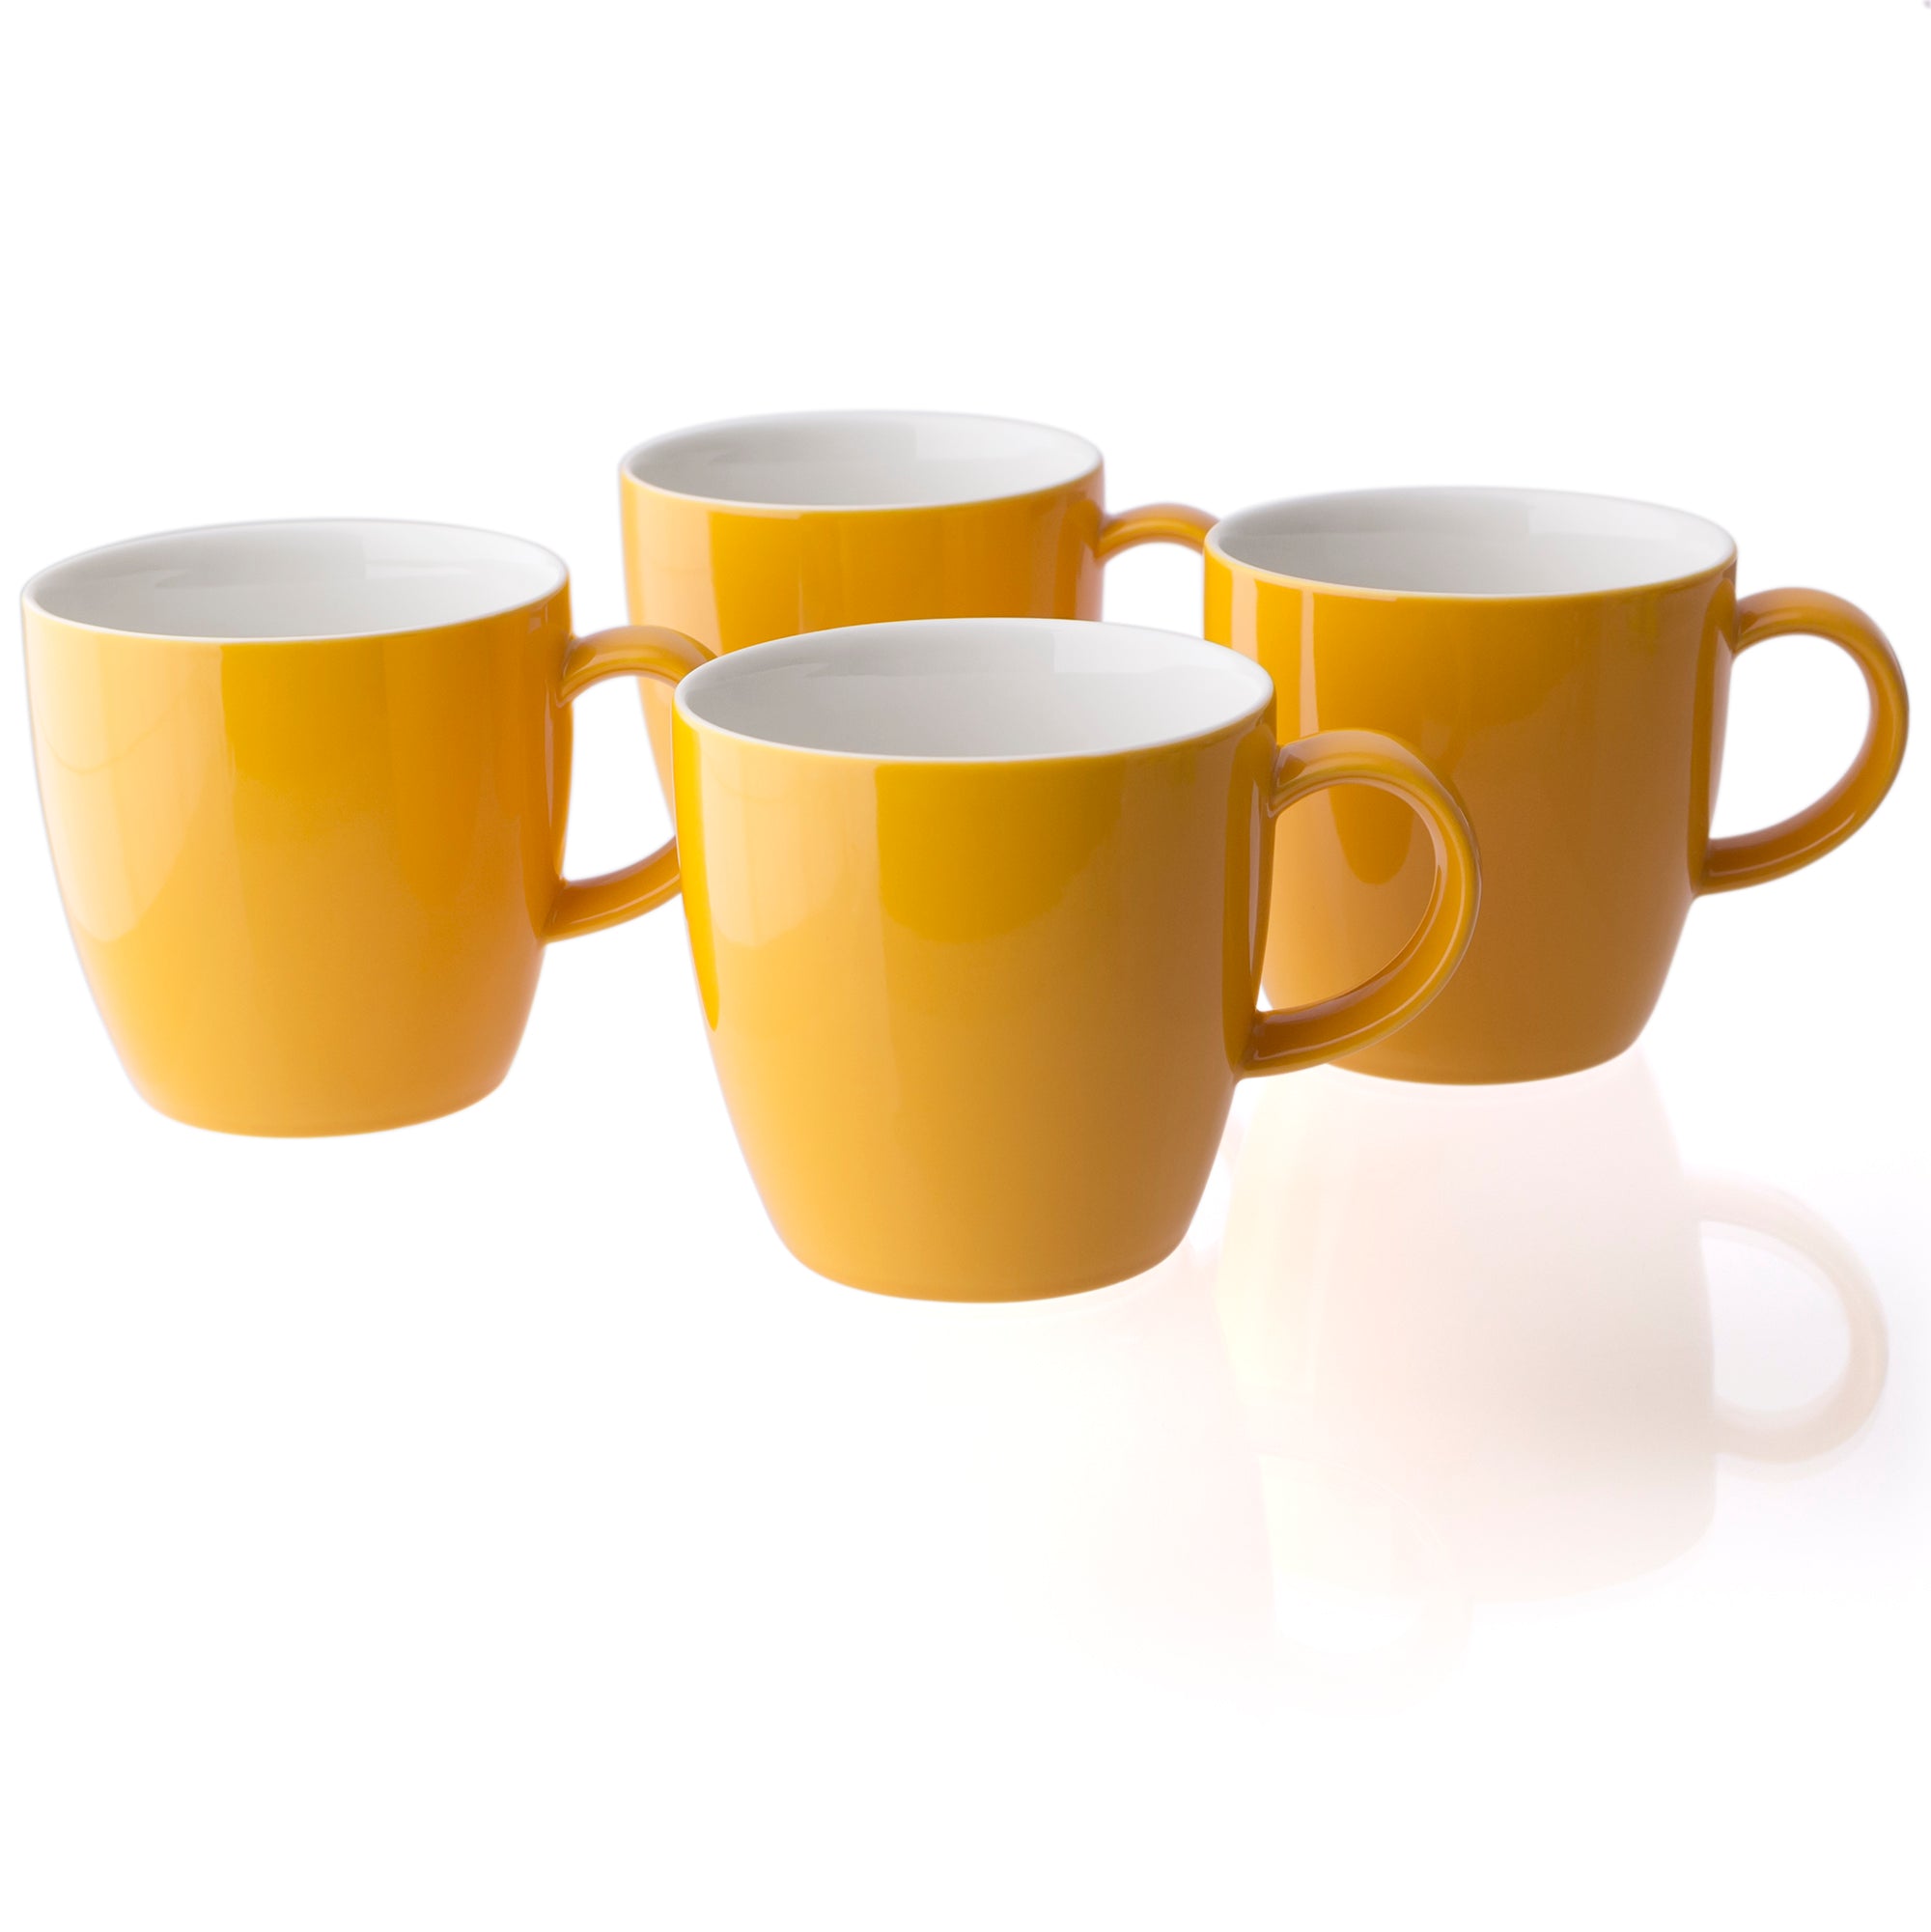 Uni Tea/Coffee Cup with handle - 11 oz., 4 pc pack